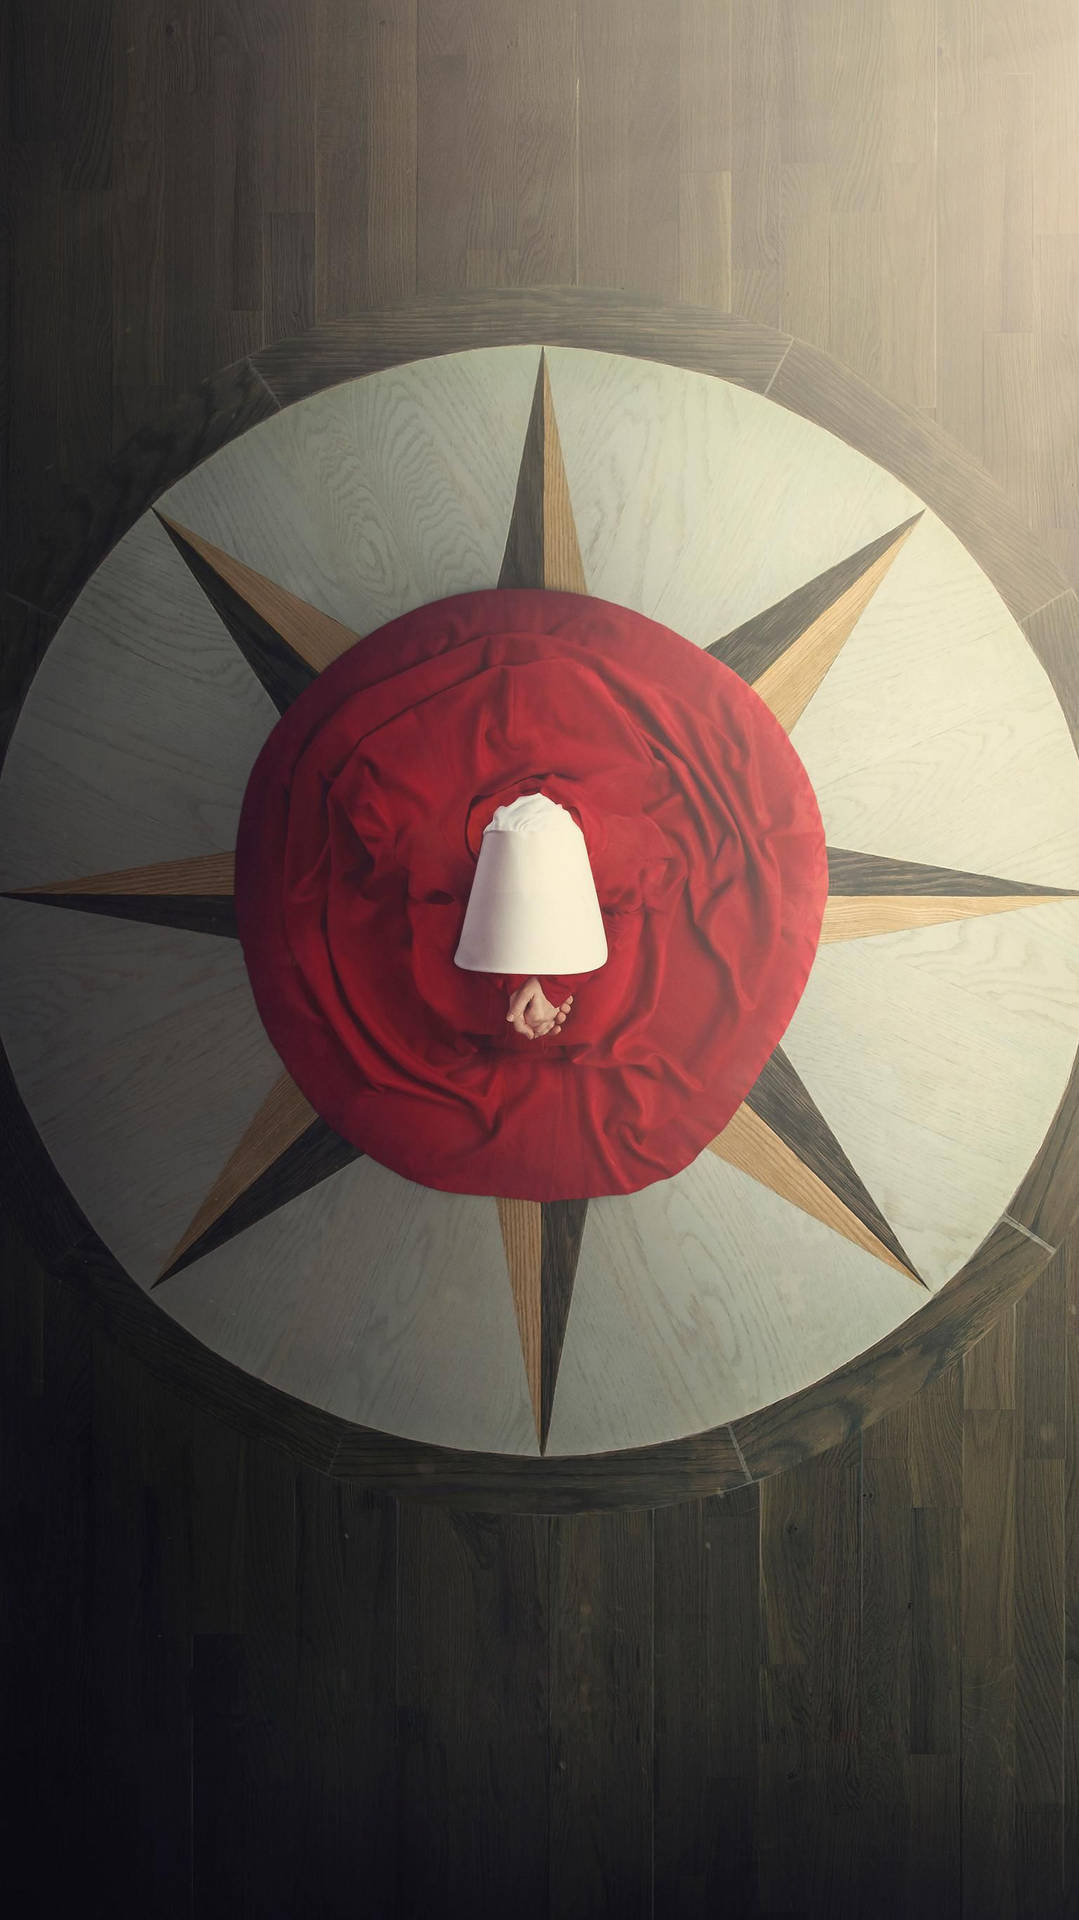 The Handmaid's Tale Compass Points Wallpaper